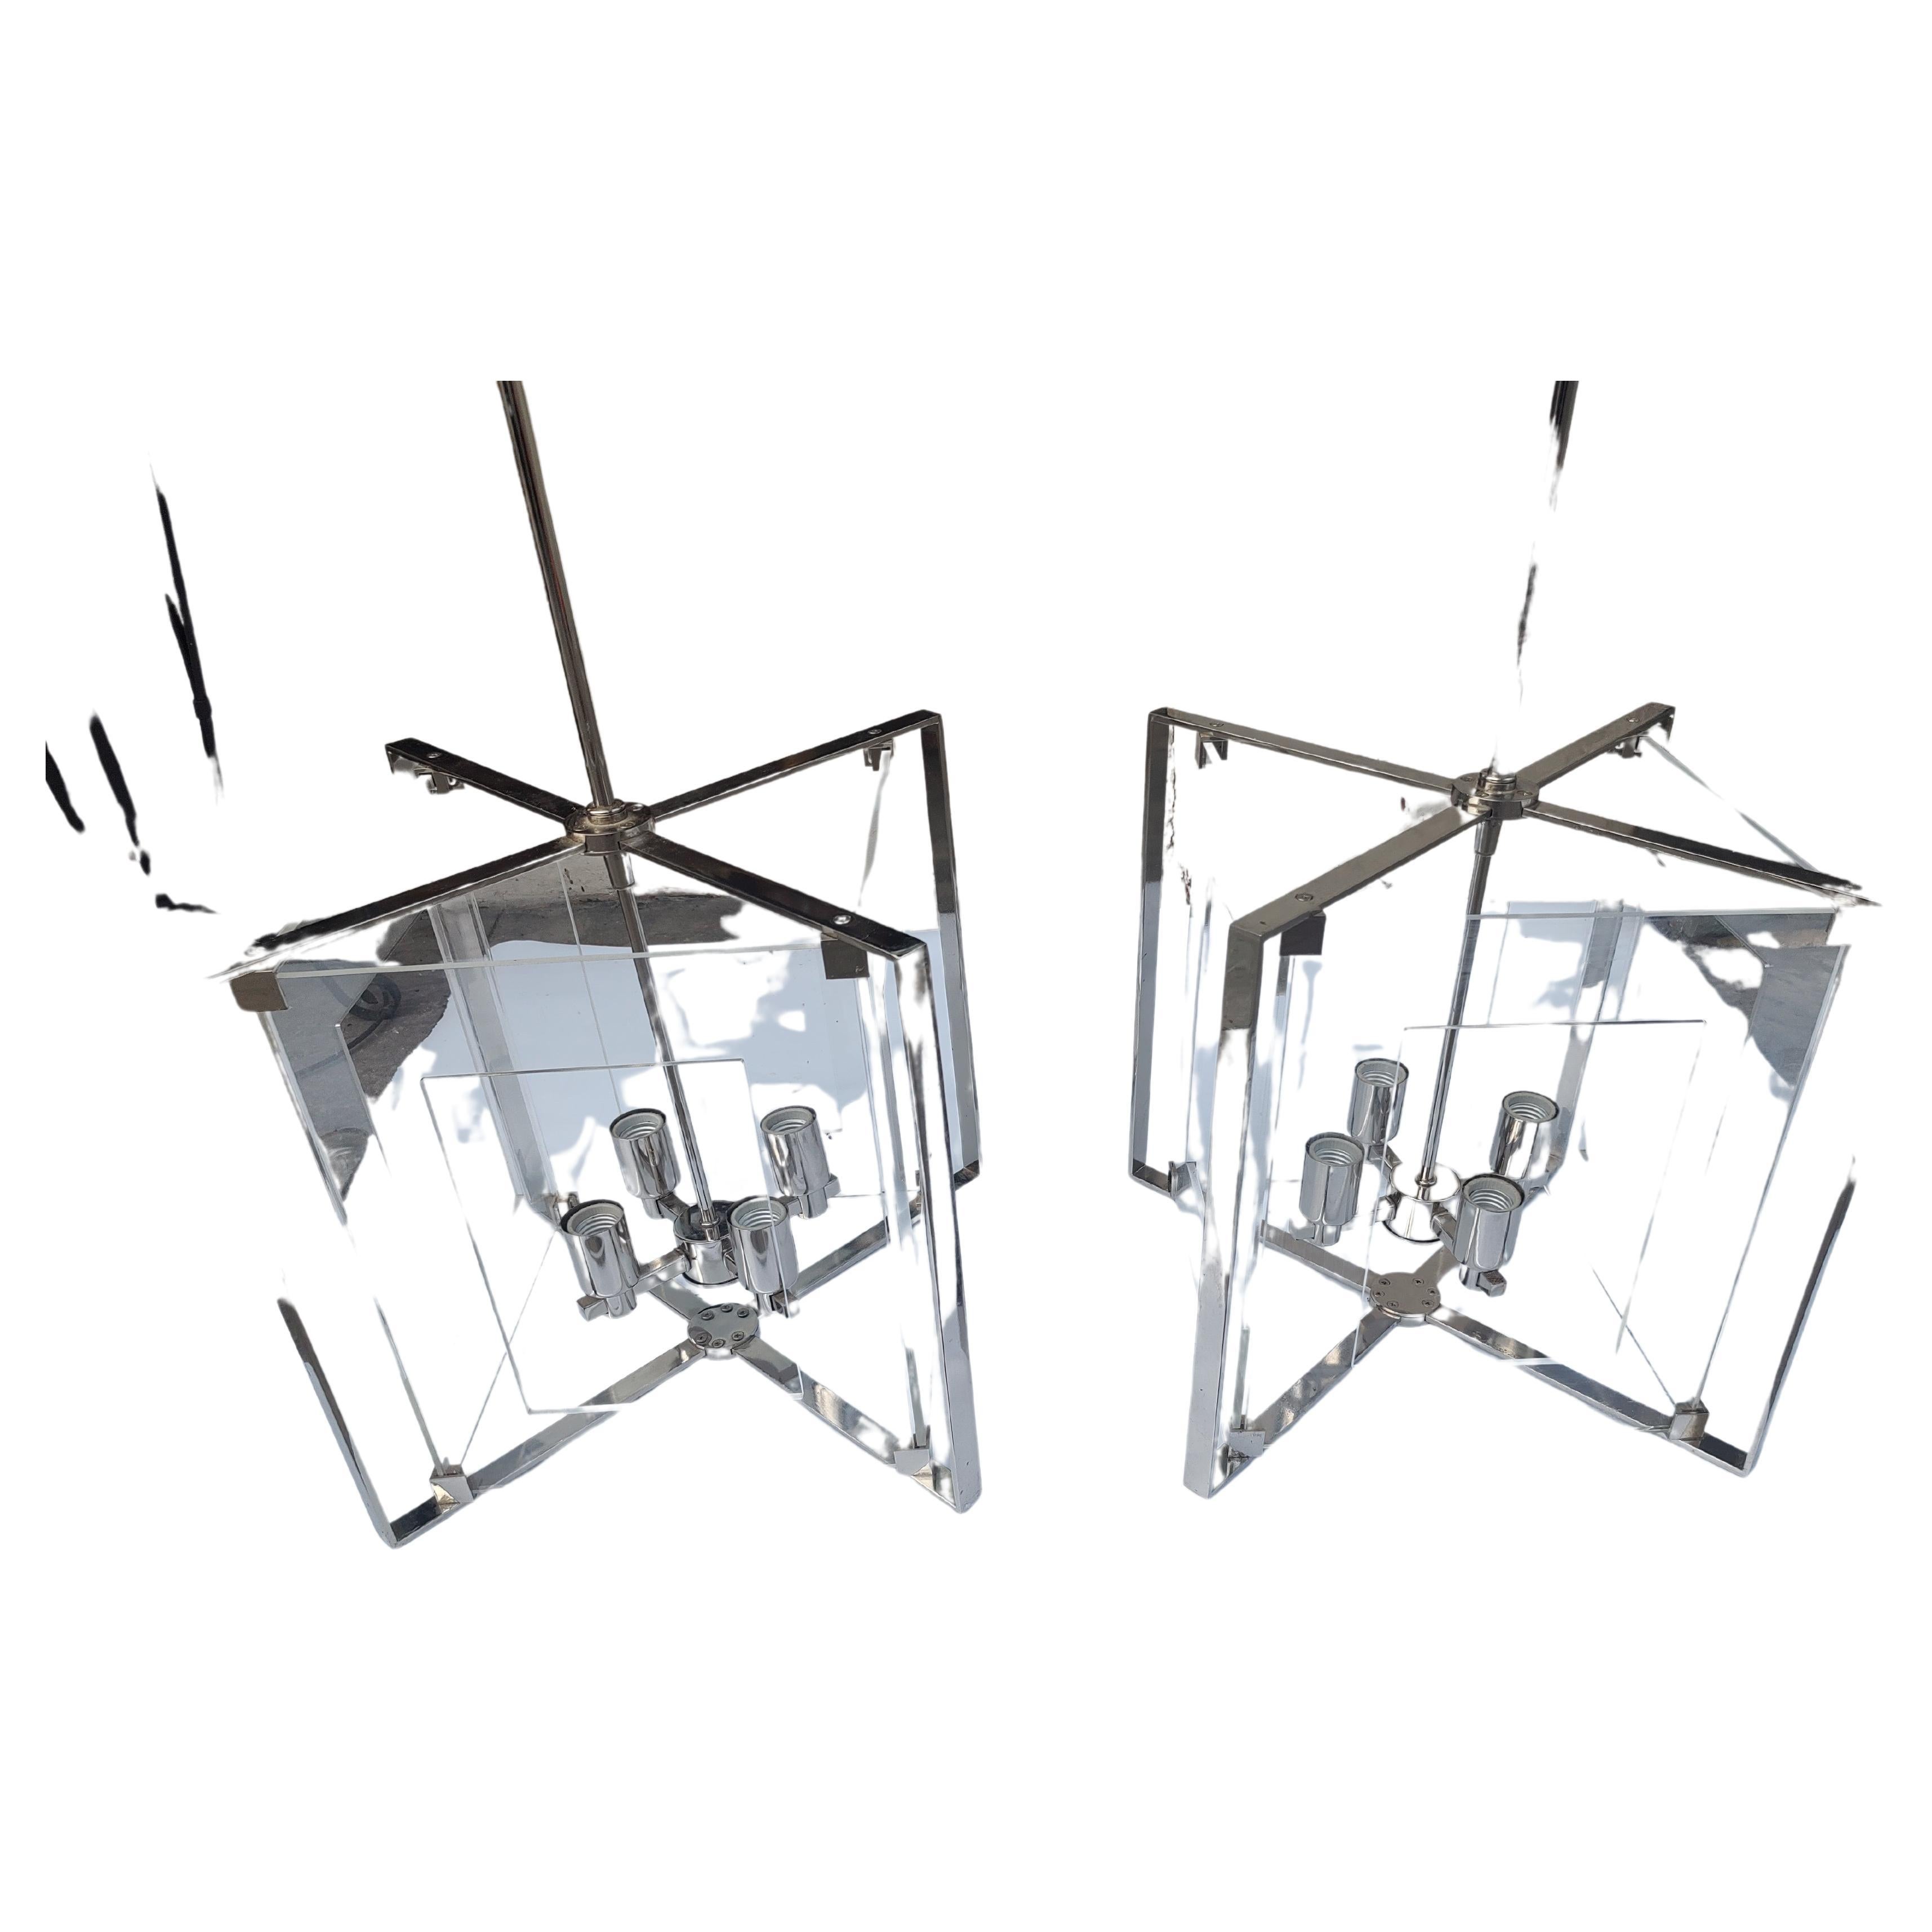 Fabulous modern and classical pair of pierced lucite with chrome frames hanging pendant lights. Beautiful style with 4 candlabra style bulbs to illuminate each fixture. Downrod and fixture combined is presently nearly 4ft but can be altered to suit